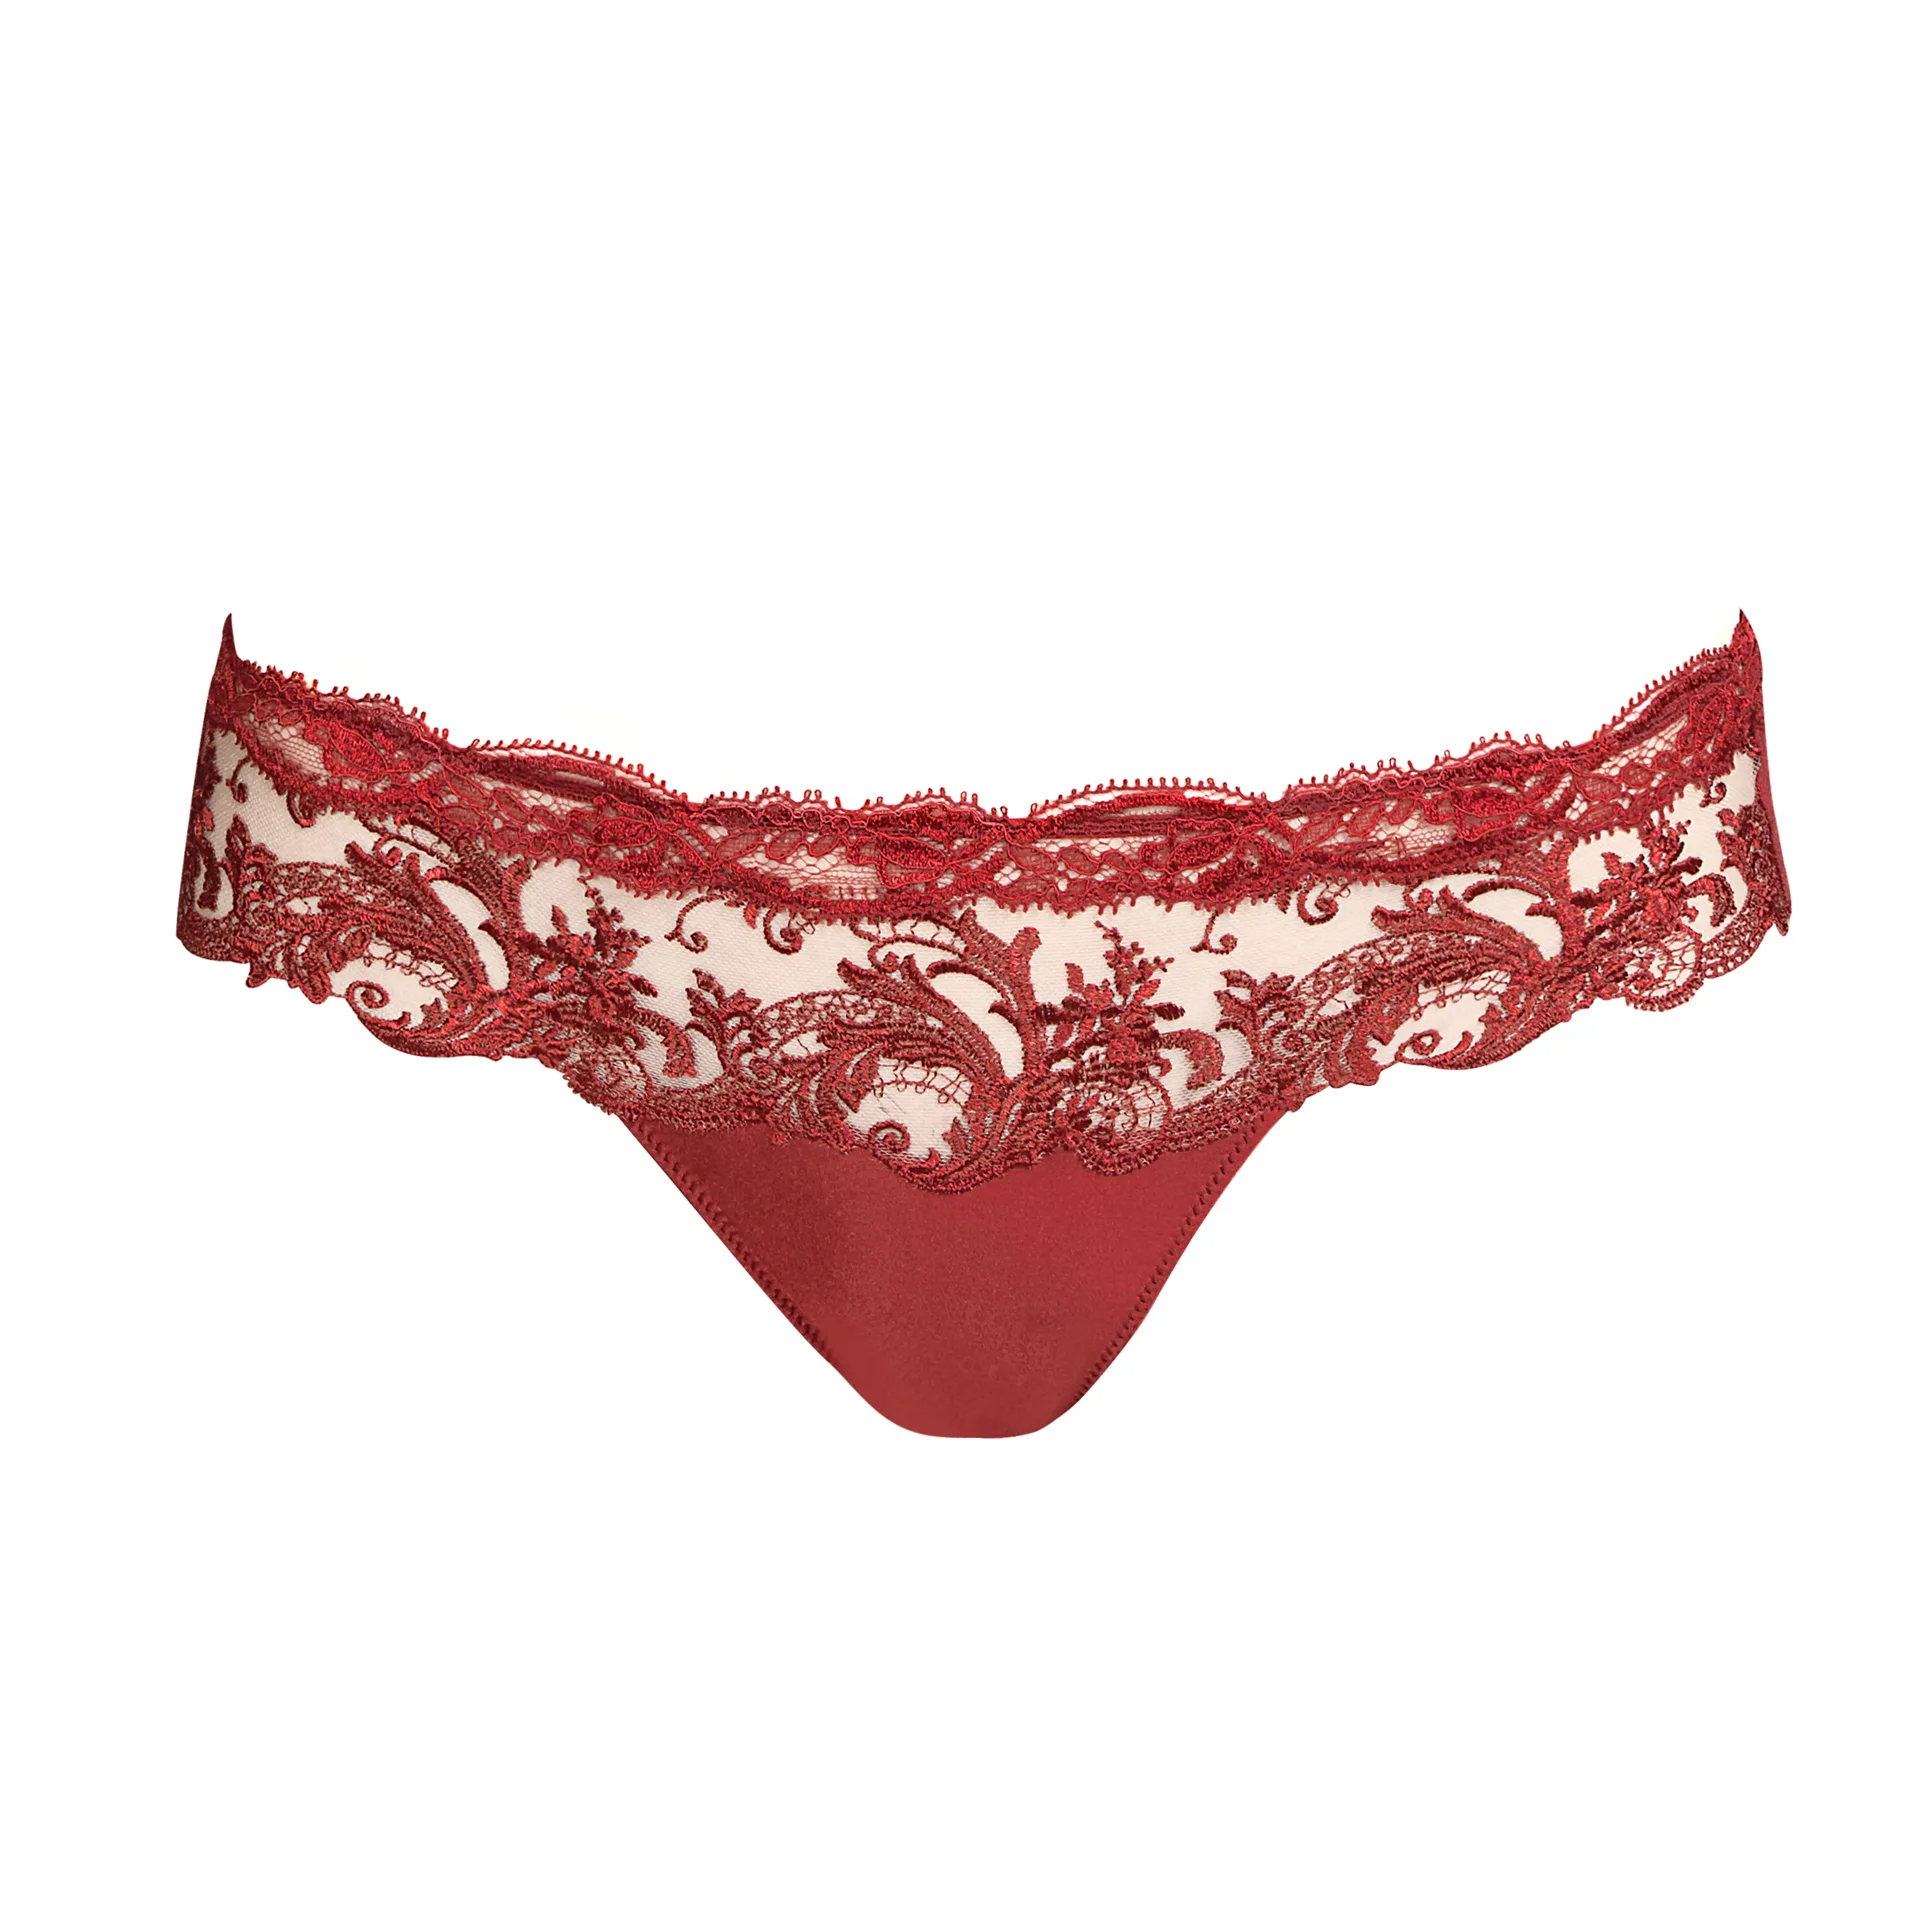 Andres Sarda COOPER luxury red short thong